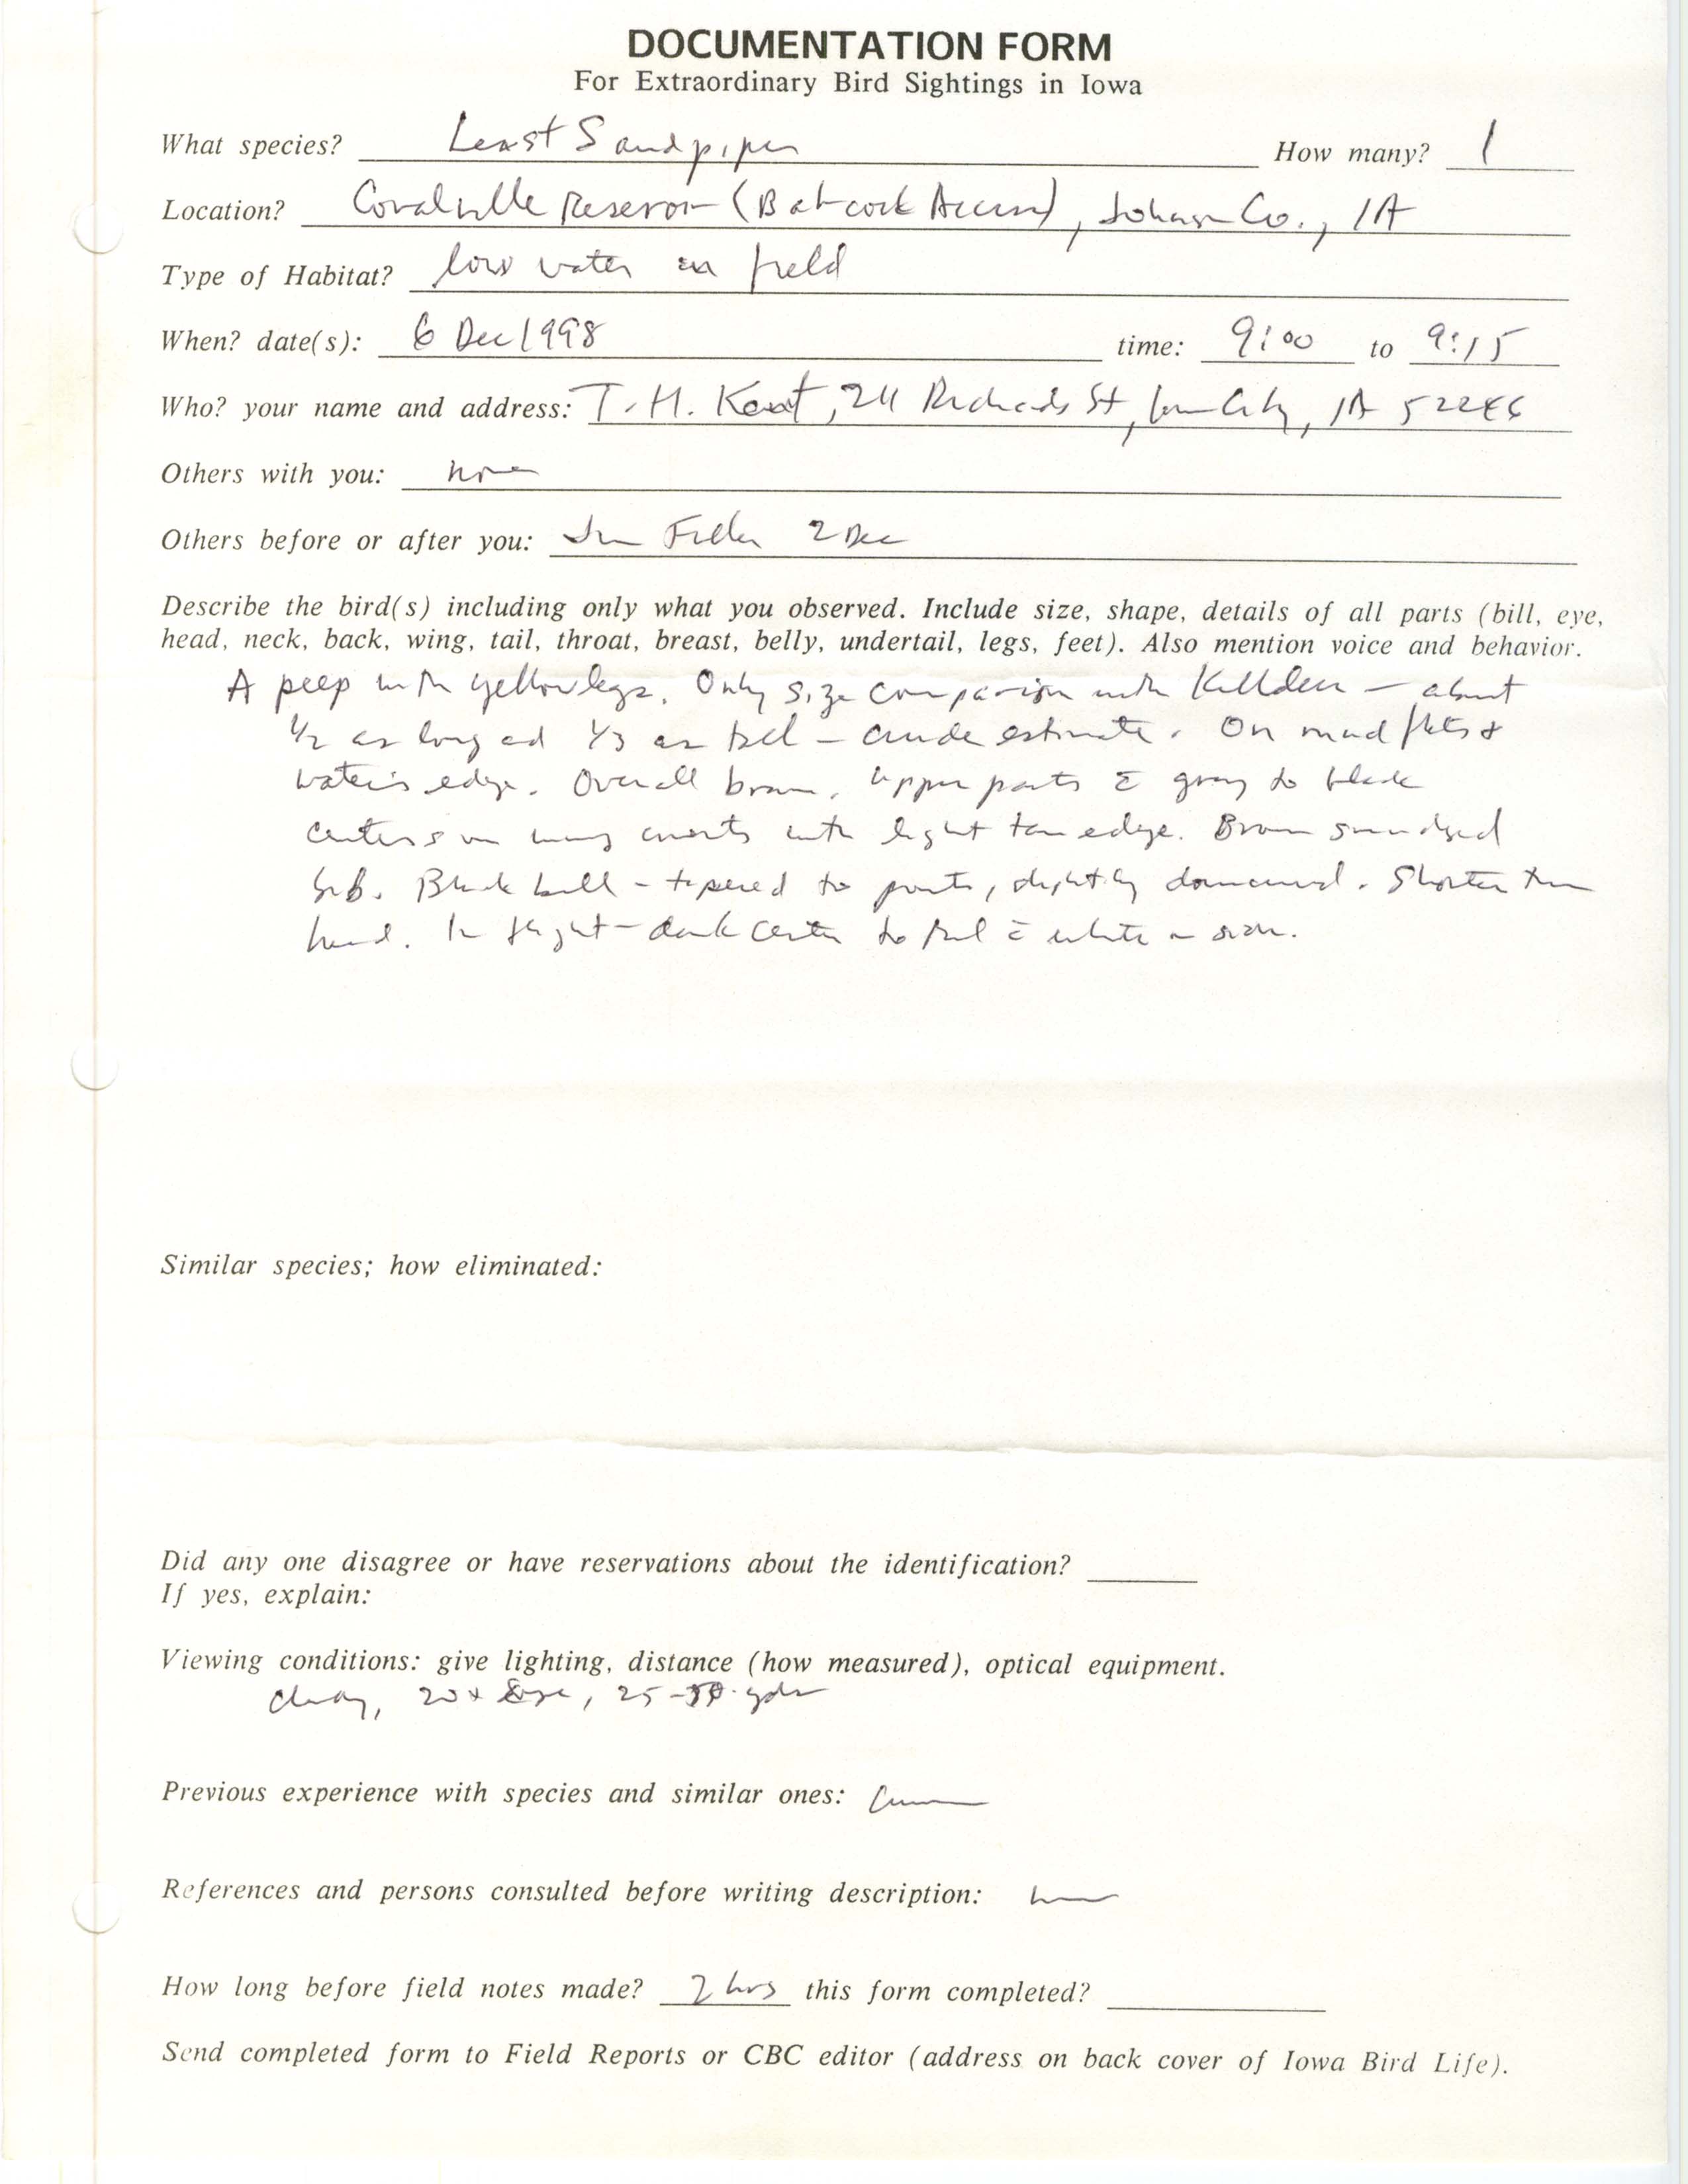 Rare bird documentation form for Least Sandpiper at Babcock Access at Coralville Reservoir, 1998